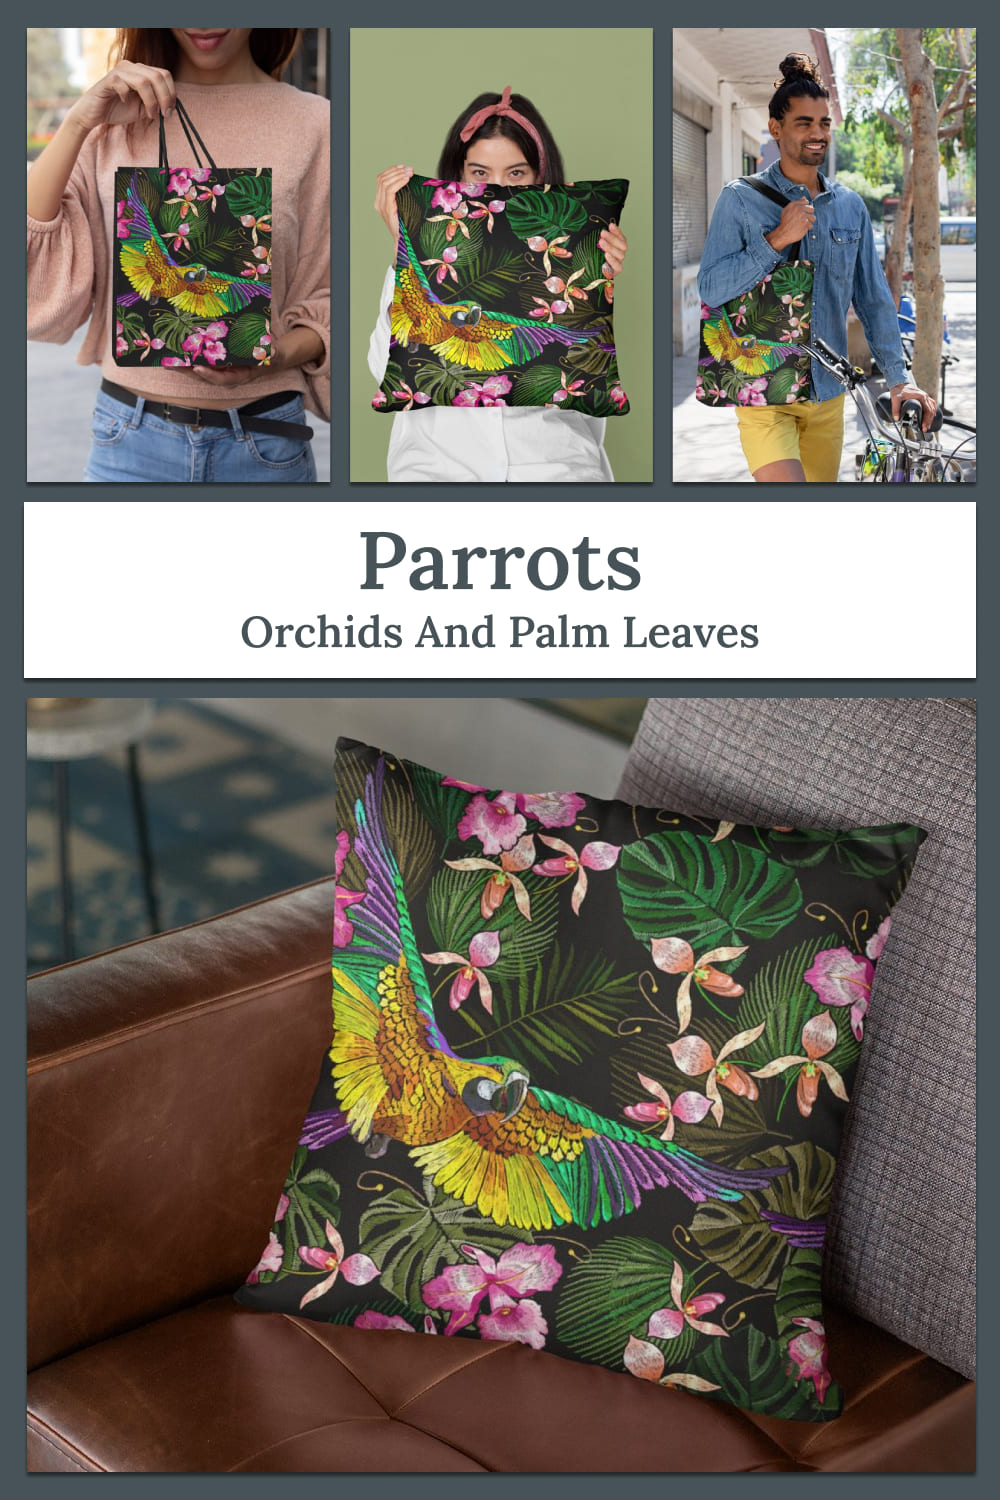 Parrots, orchids and palm leaves - pinterest image preview.